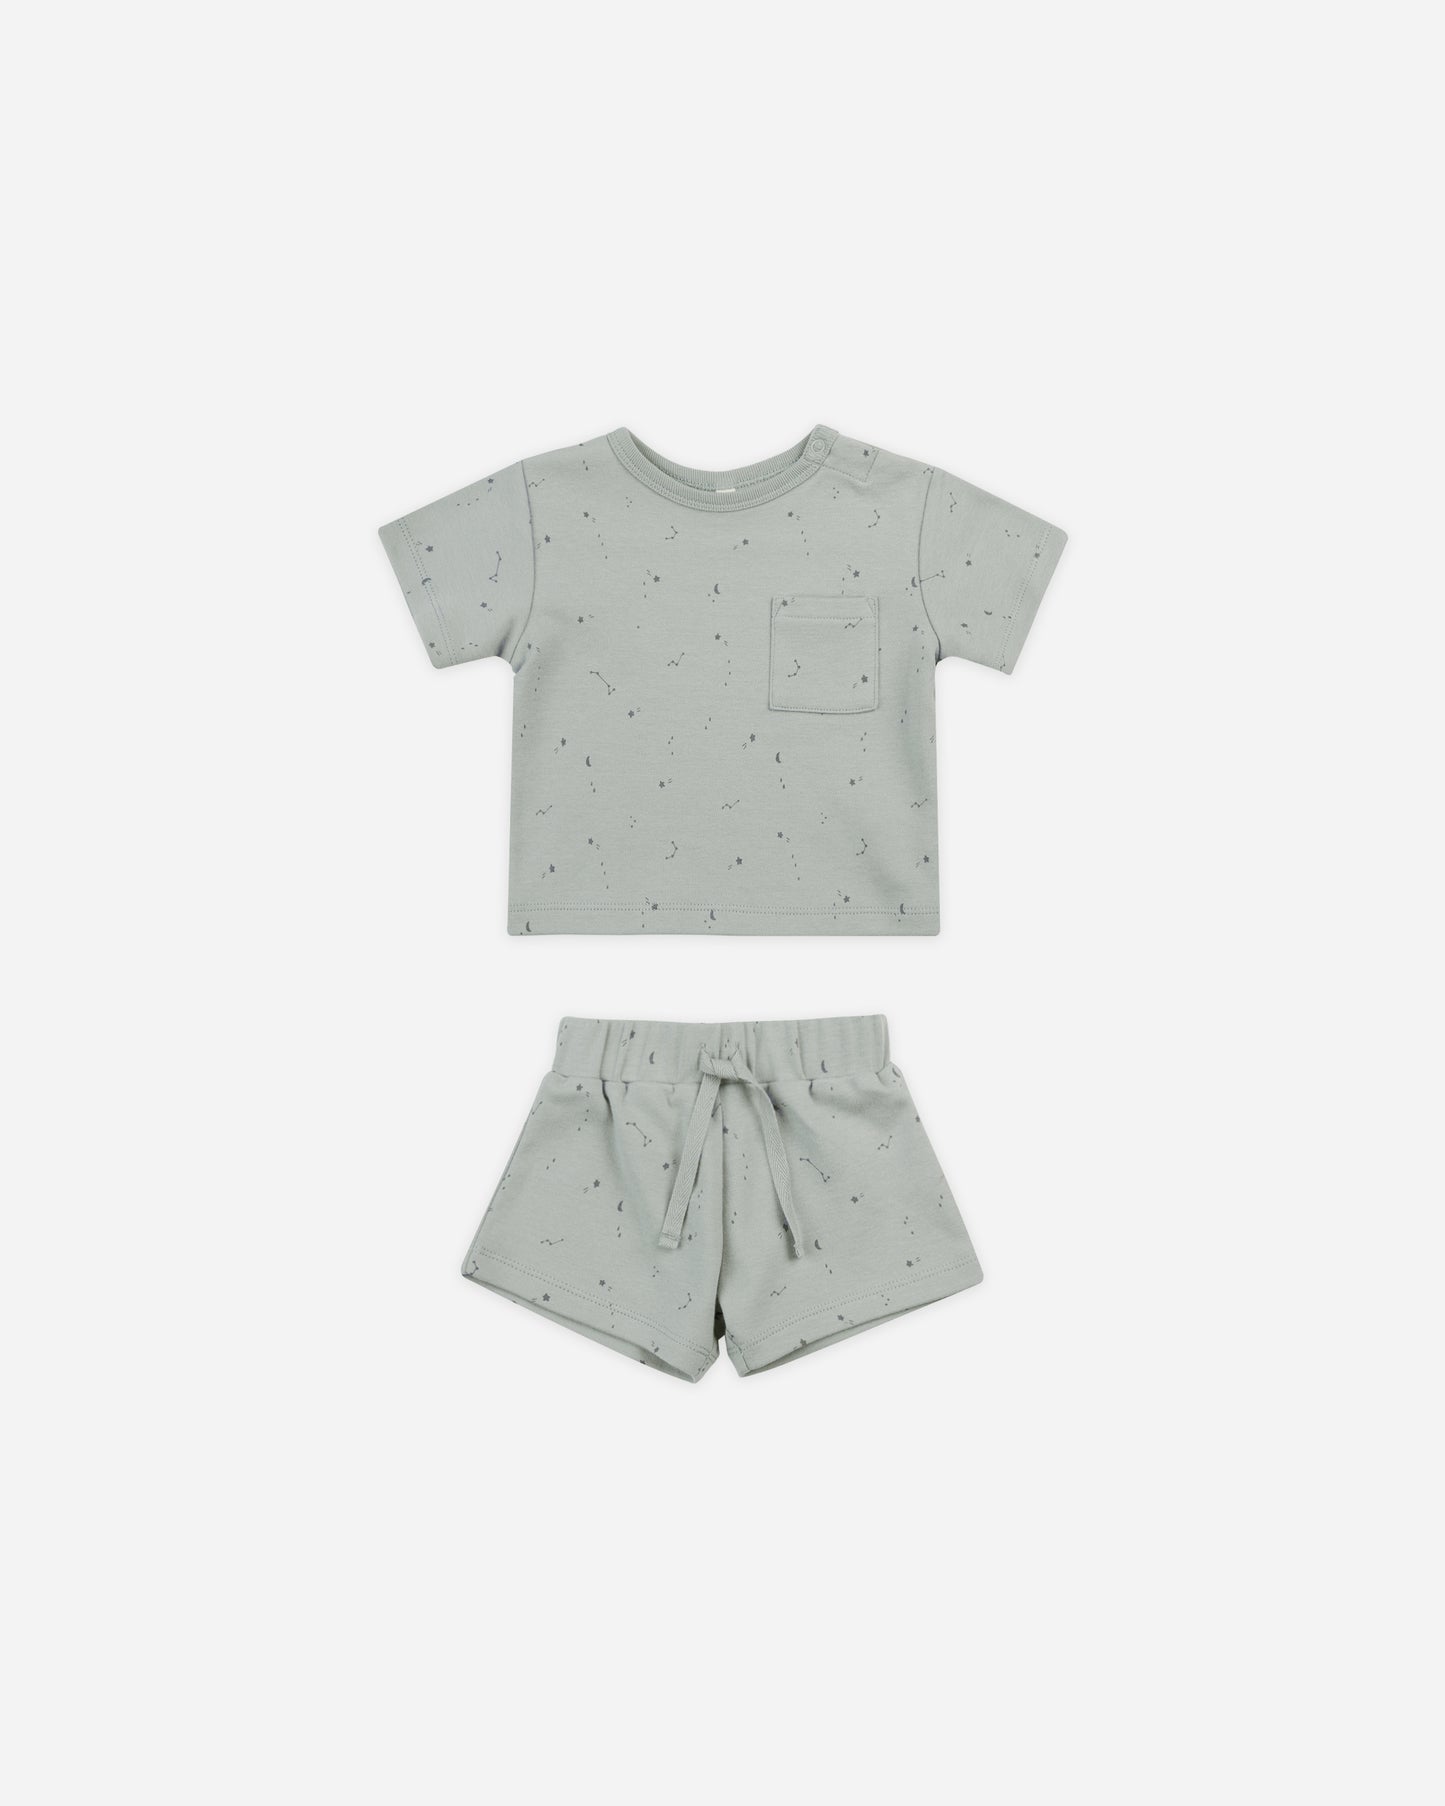 Boxy Pocket Tee + Short Set || Constellations - Rylee + Cru | Kids Clothes | Trendy Baby Clothes | Modern Infant Outfits |